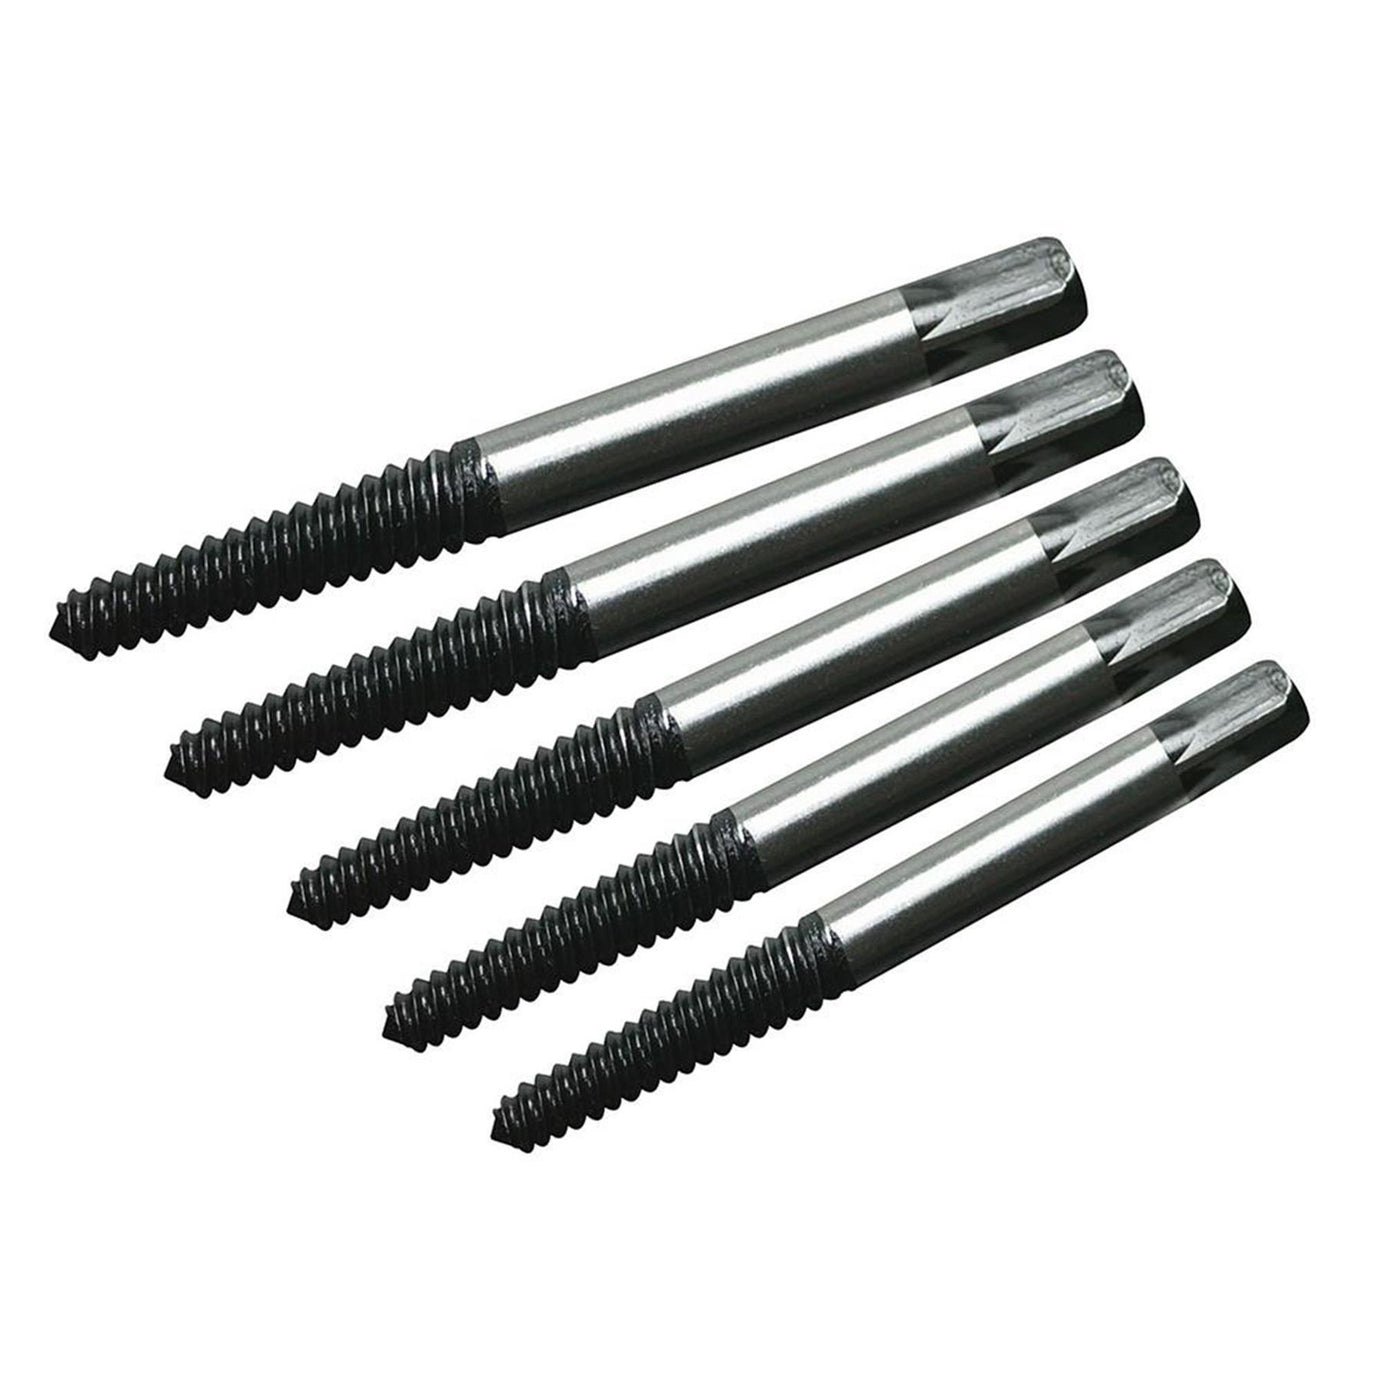 Screw Extractor Set 5Pc With Tapered Design For Multiple Fixing Sizes 3 - 18mm